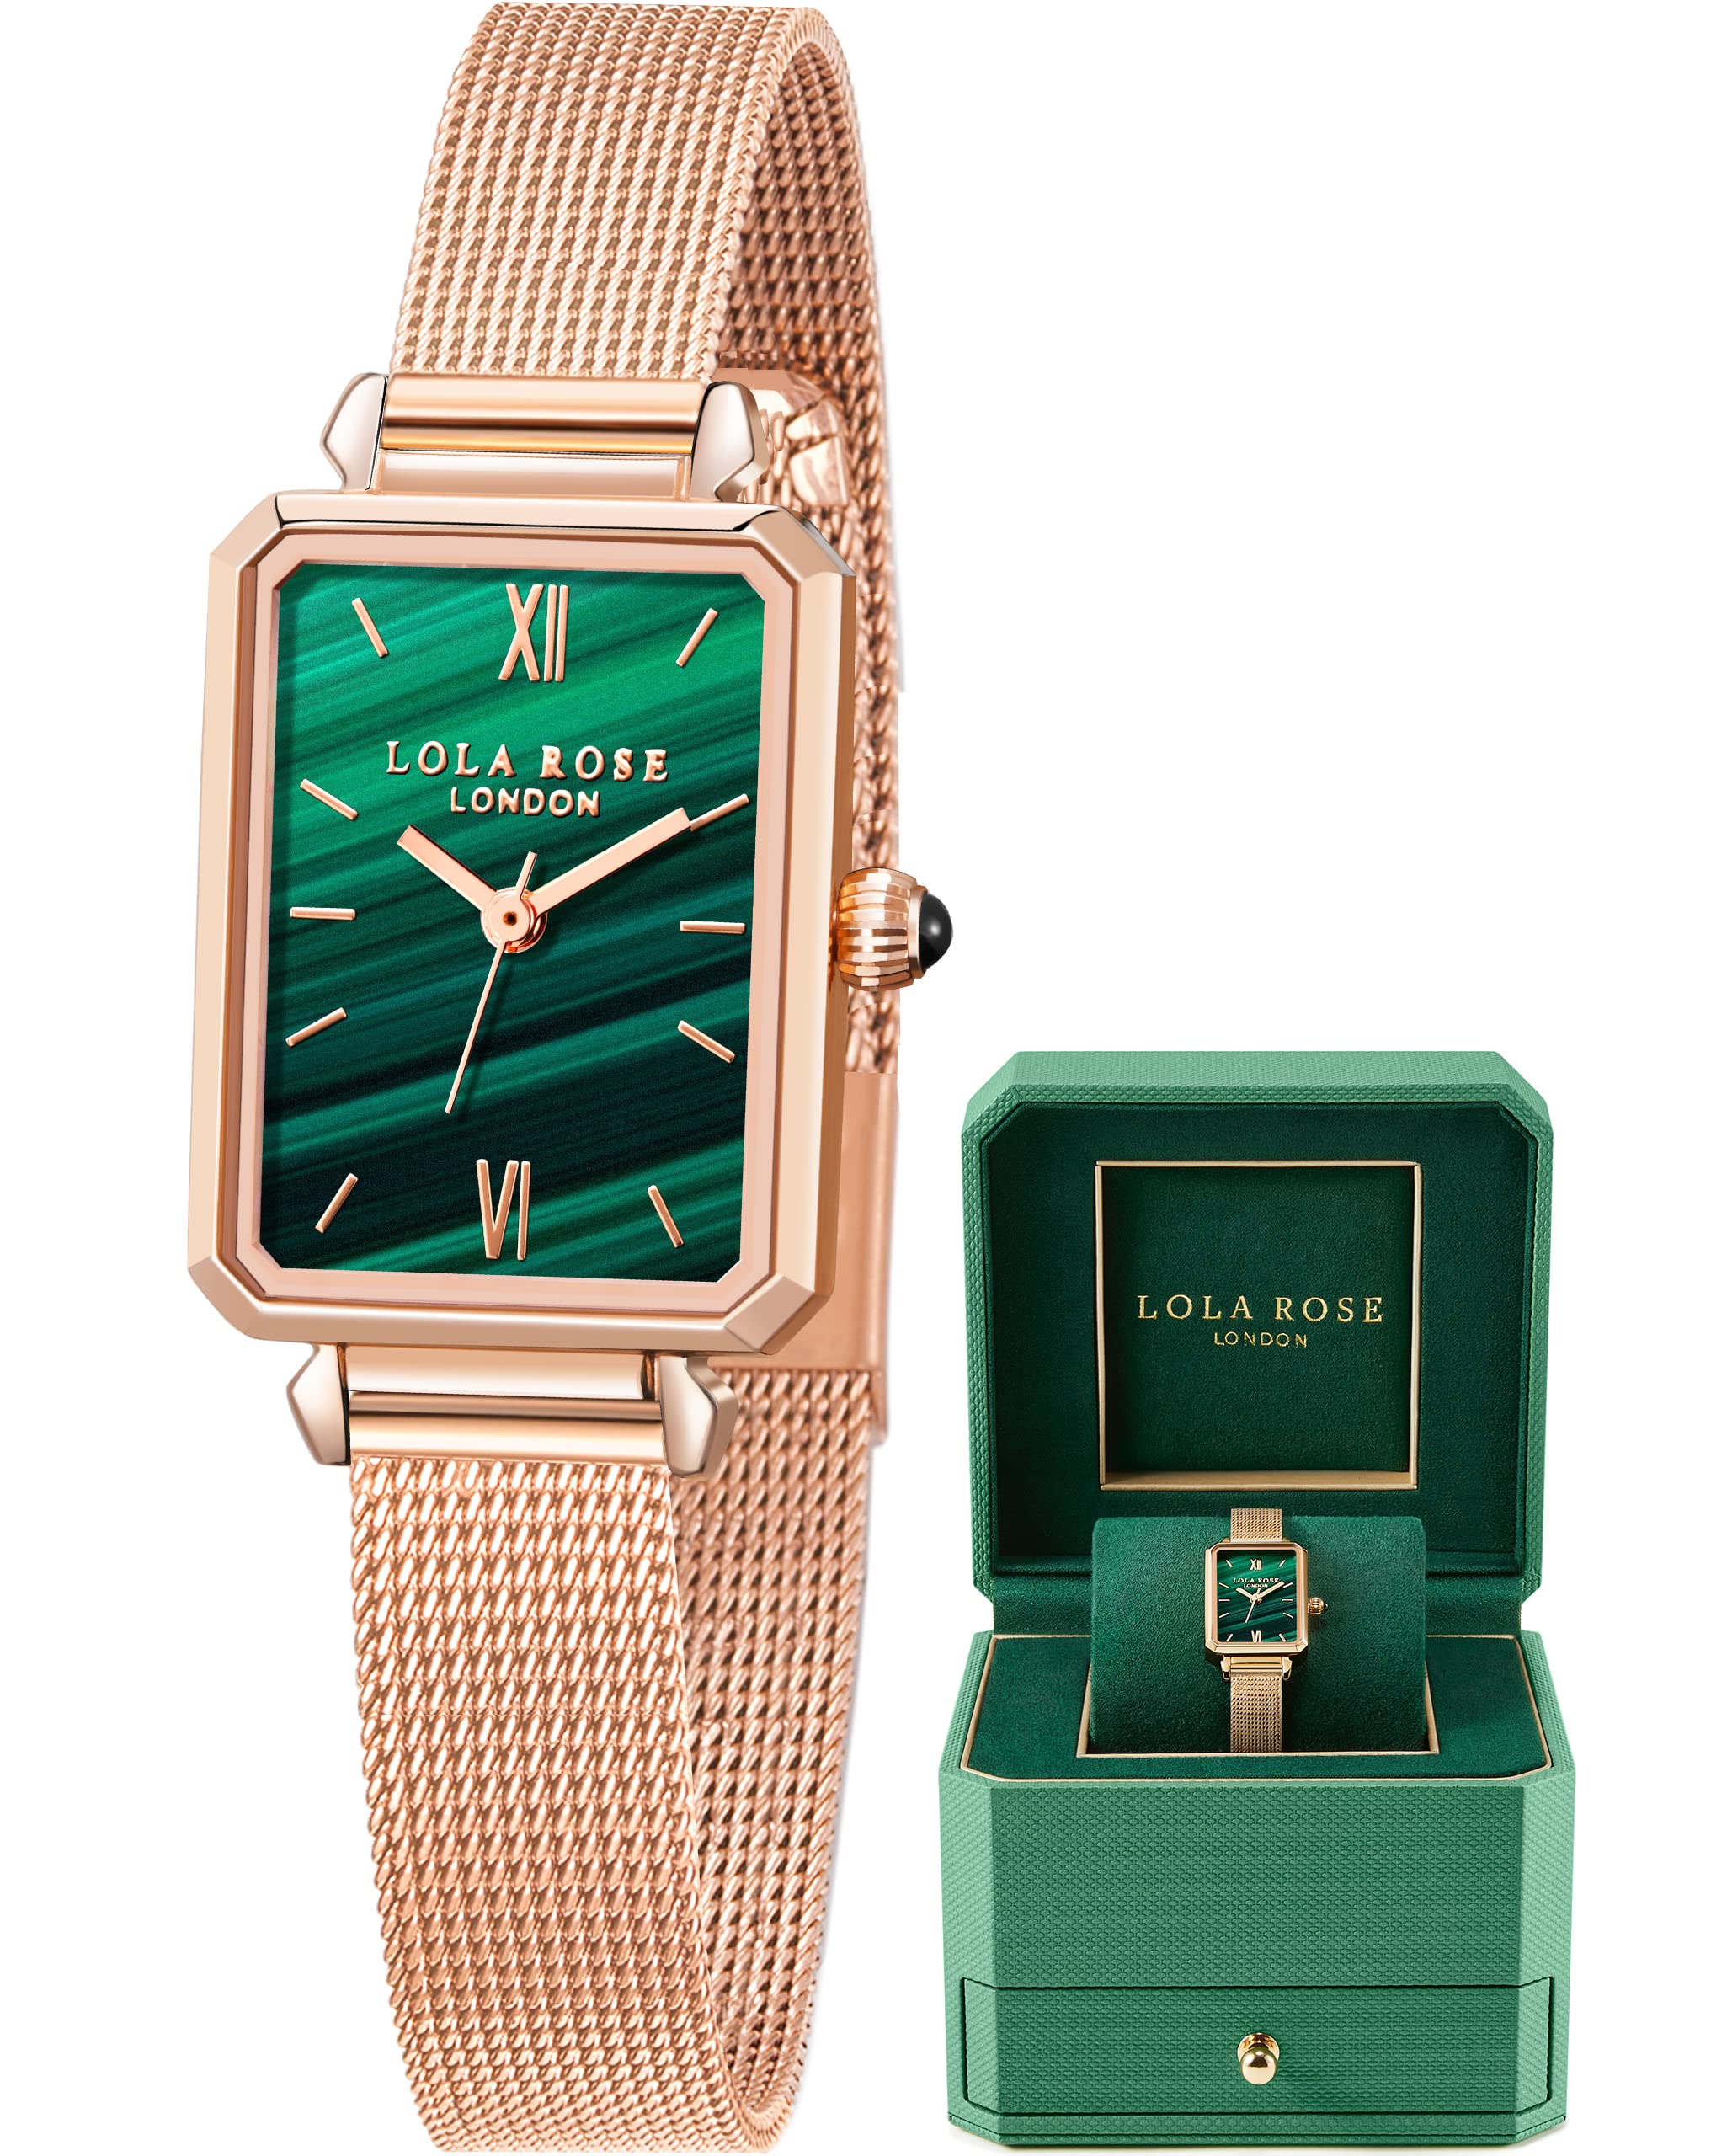 Lola Rose Classy Watches for Women, Women 's Wrist Watch with Rose Gold Stainless Steel Band, Womens Watch with Green Dial, Watch for Ladies Gift